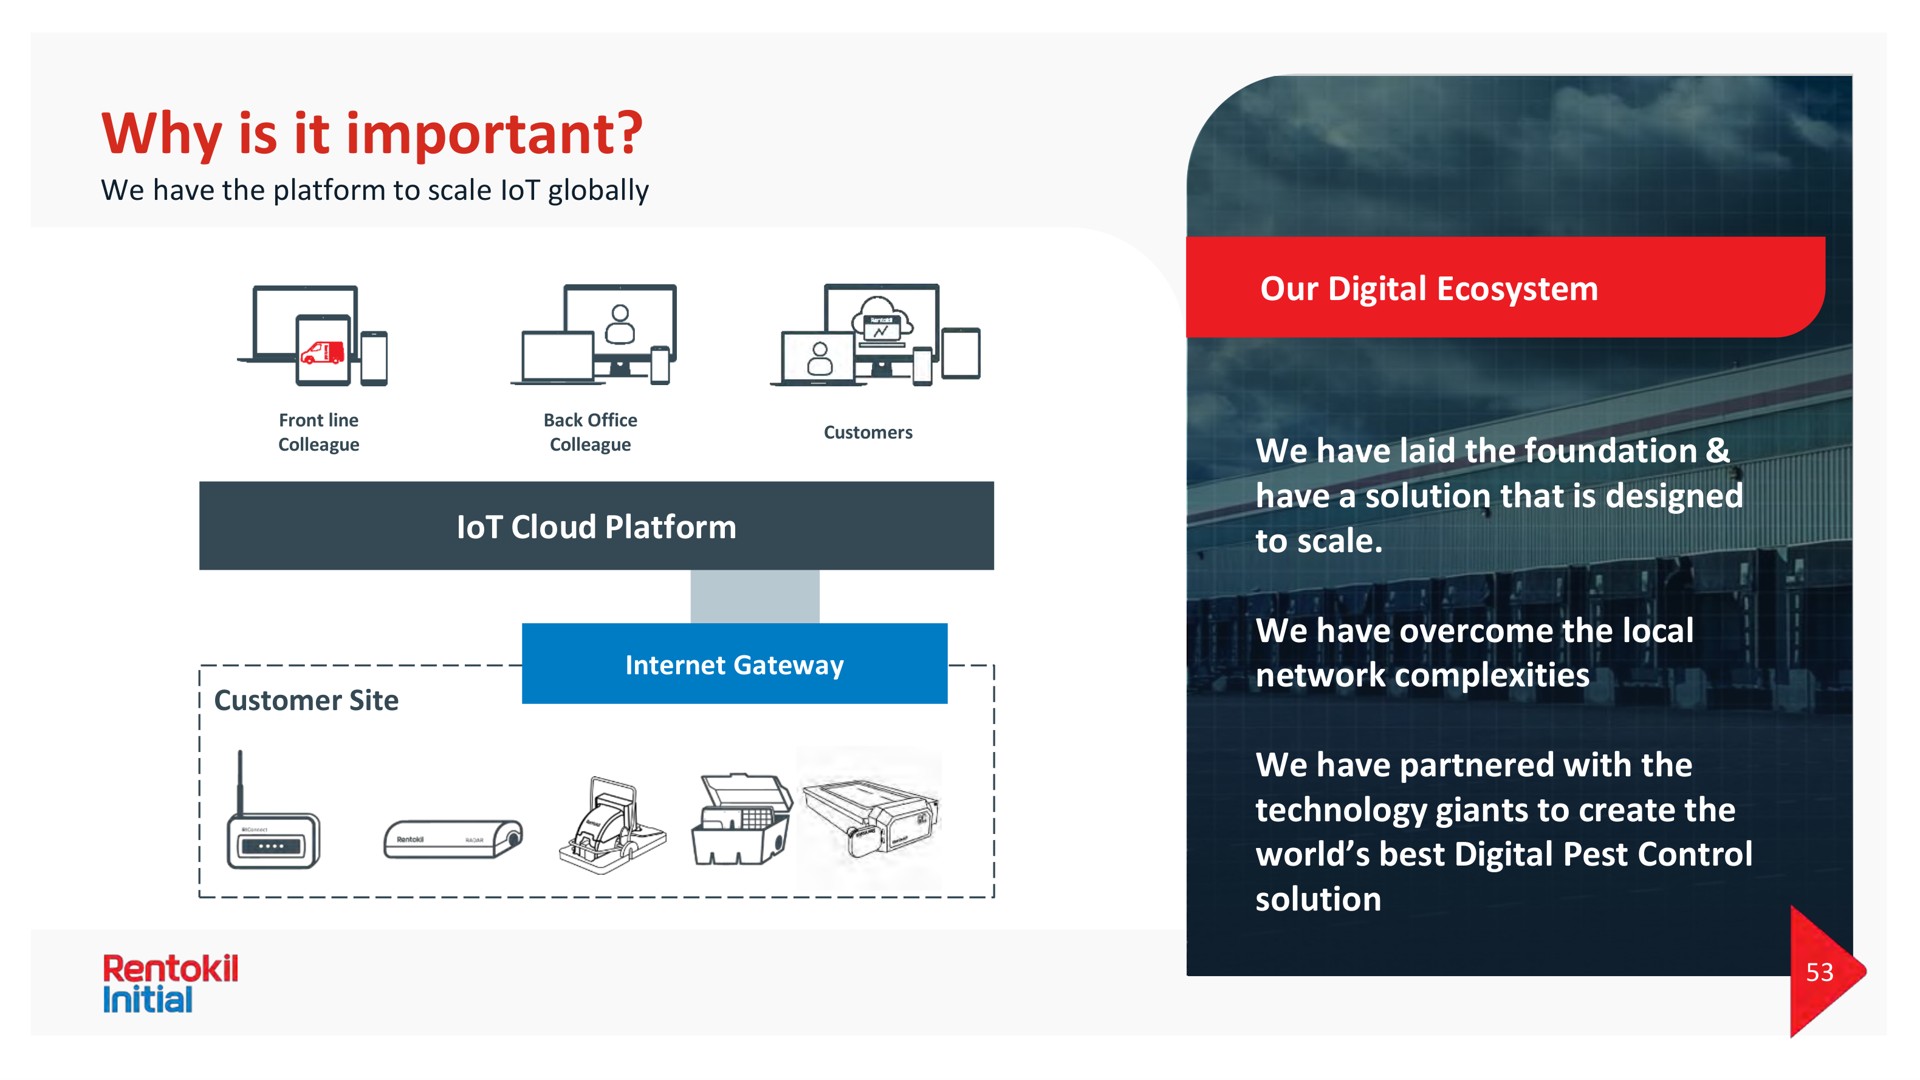 why is it important cloud platform our digital ecosystem we have laid the foundation have a solution that is designed to scale we have overcome the local network complexities we have partnered with the technology giants to create the world best digital pest control solution i poe be | Rentokil Initial